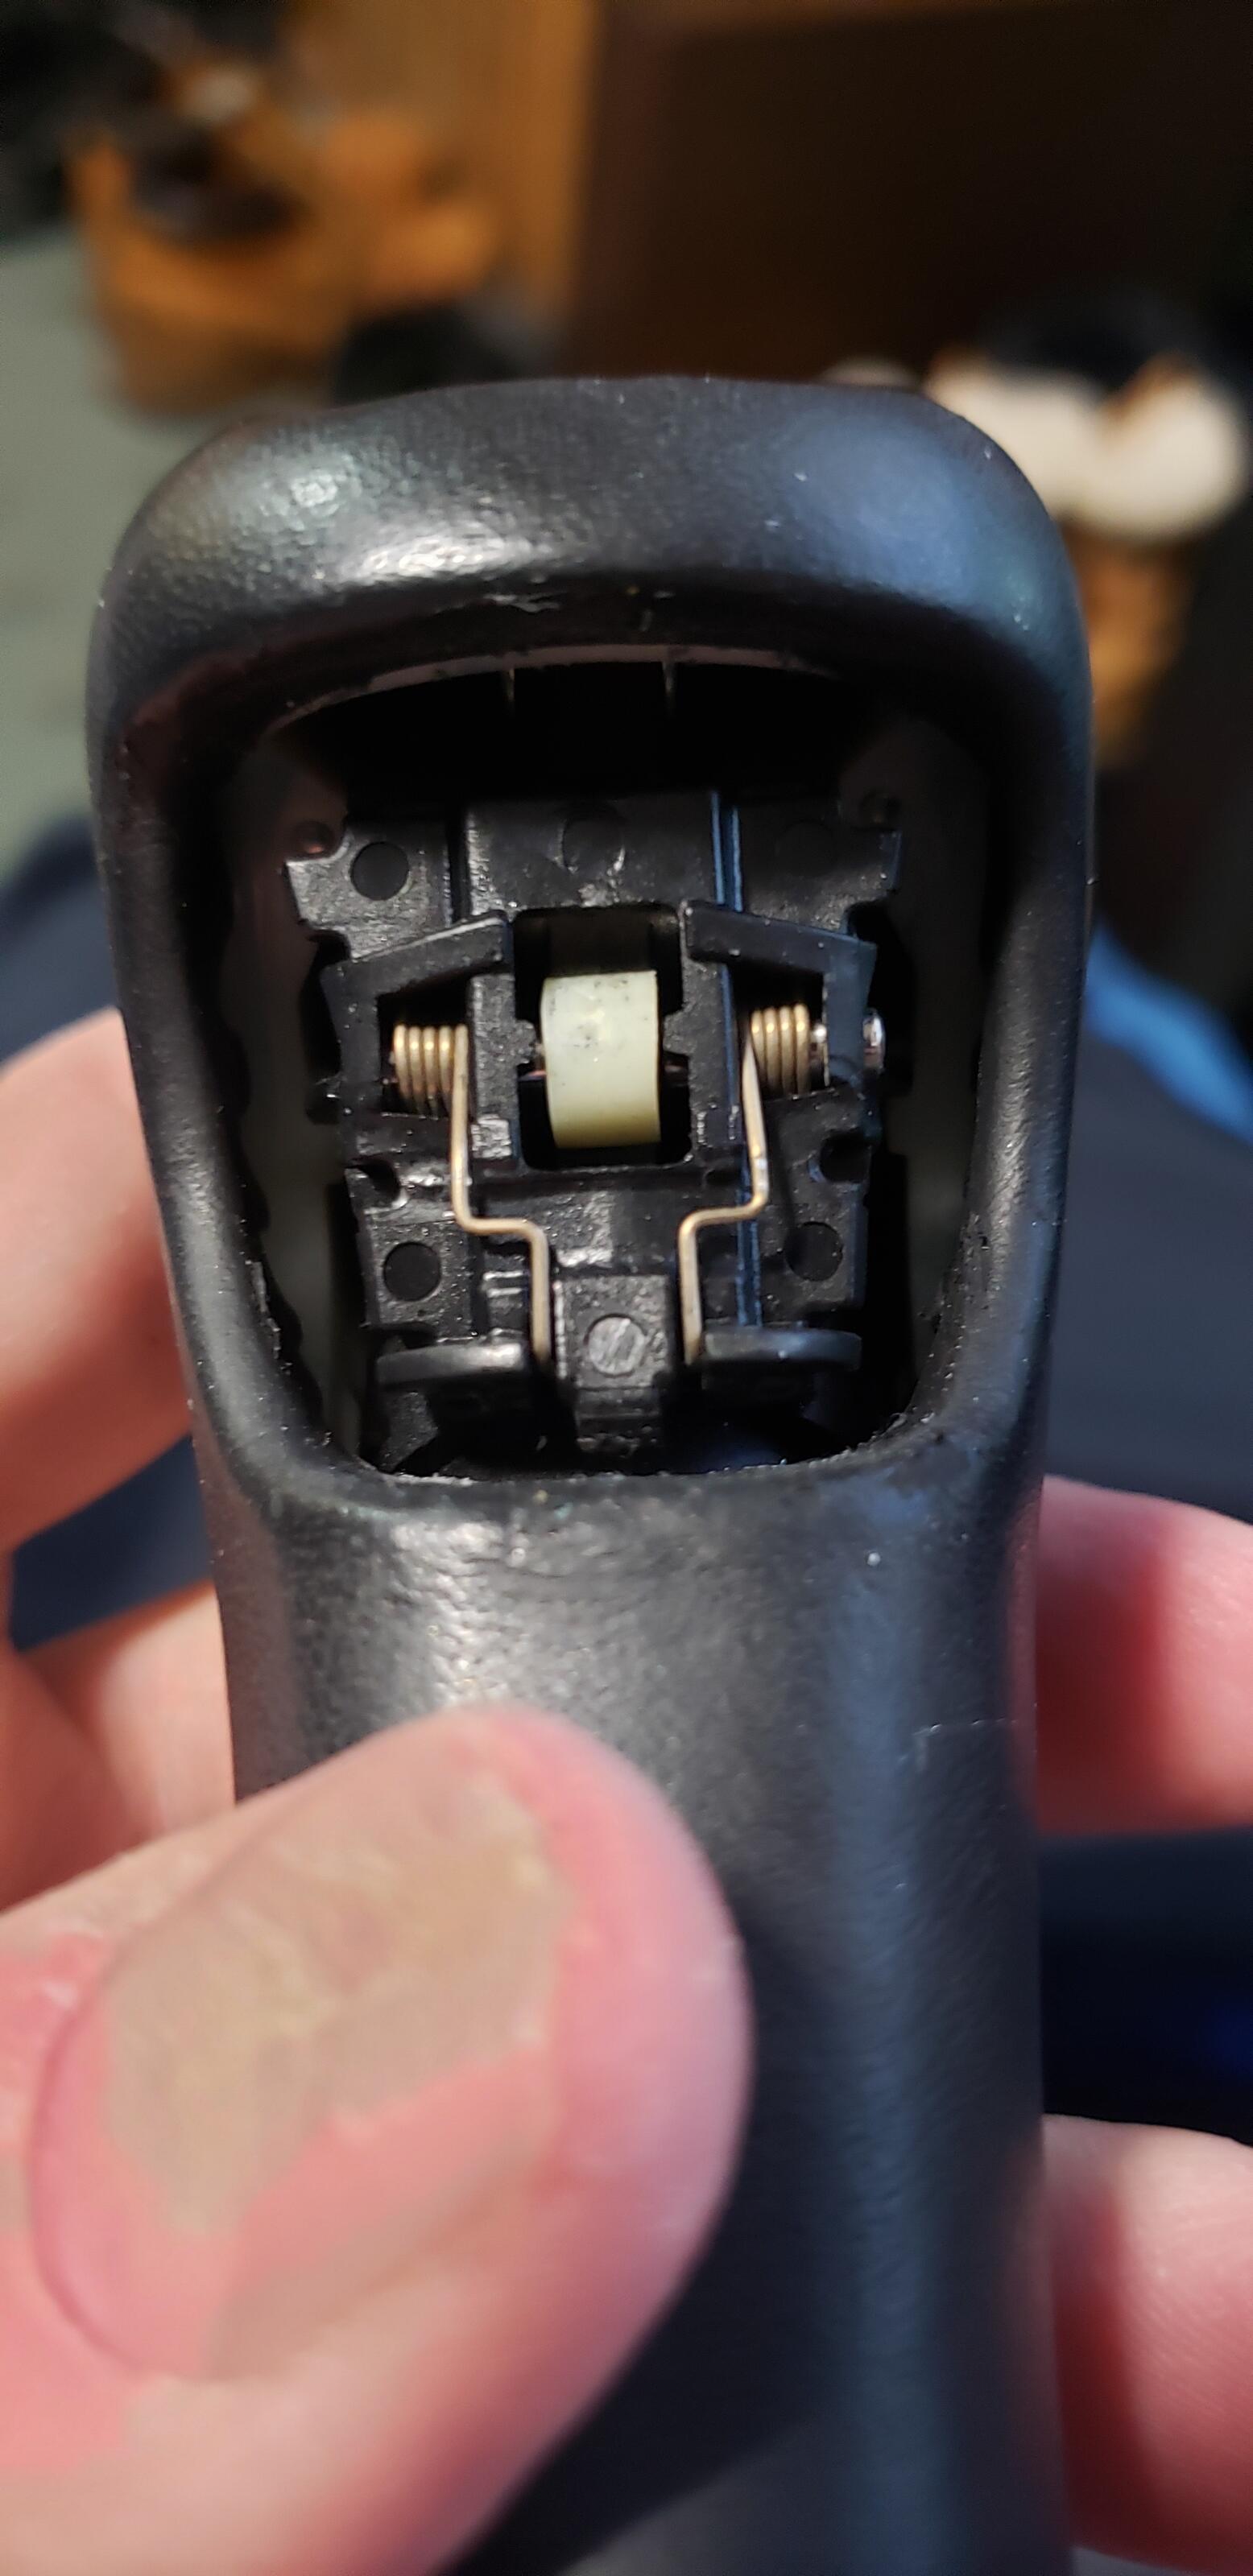 HELP!!!! Pulled off shift knob, now not shifting - Rennlist - Porsche  Discussion Forums